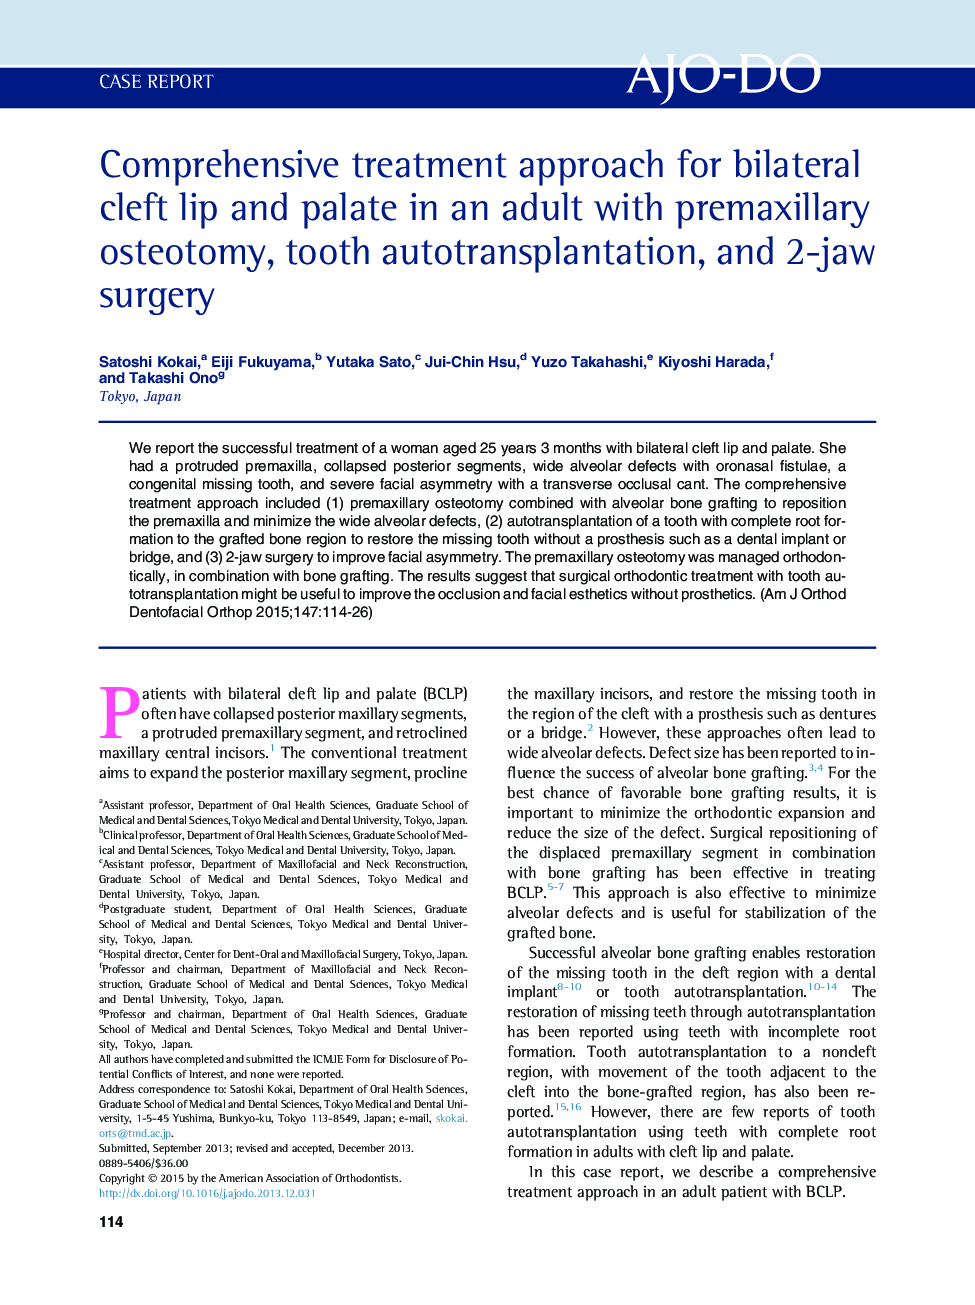 Comprehensive treatment approach for bilateral cleft lip and palate in an adult with premaxillary osteotomy, tooth autotransplantation, and 2-jaw surgery